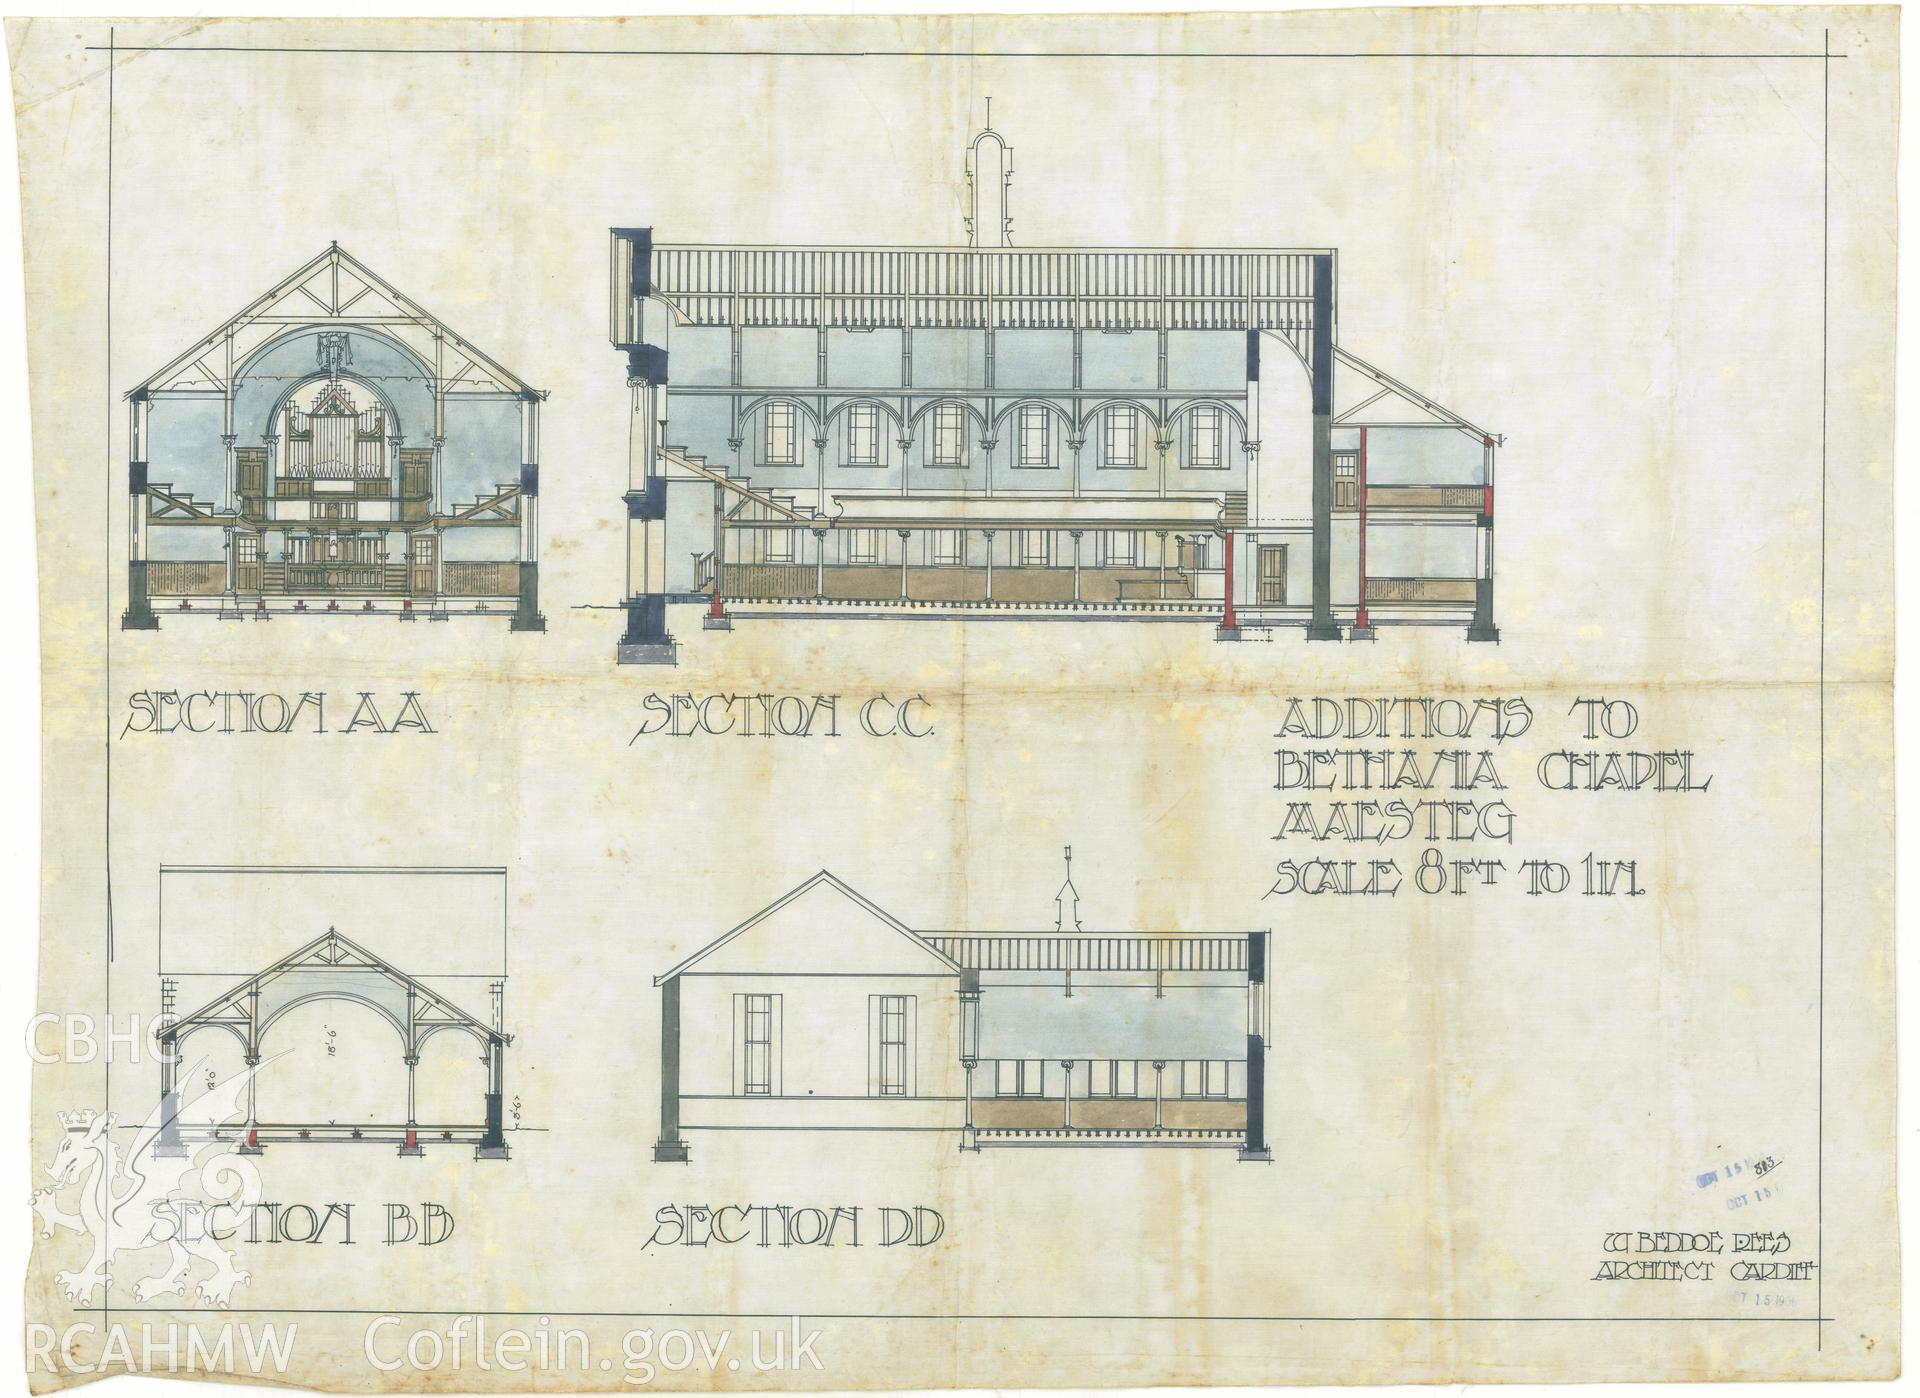 Digitized copy of a coloured pen and ink drawing by W. Beddoe Rees, dated 1906, showing the longitudinal and cross sections of the interior of Bethania Chapel, Maesteg. One of a set of original architectural drawings of Bethania Chapel, Maesteg, loaned for copying by their owners, the Welsh Religious Buildings Trust. The original drawings are held by the Glamorgan Record Office.